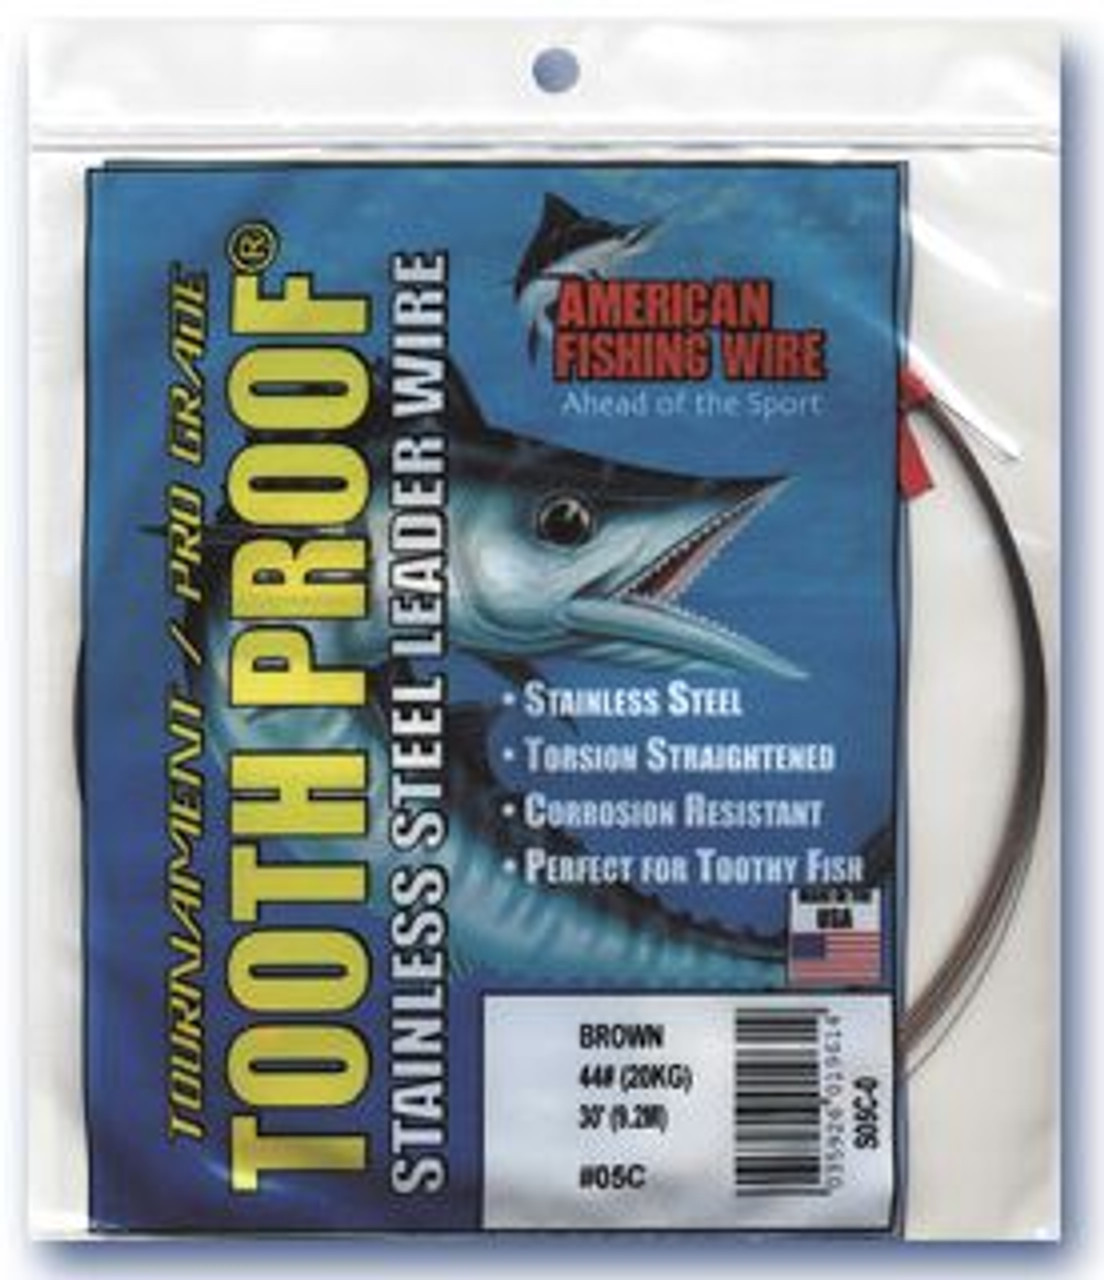 https://cdn11.bigcommerce.com/s-pr9amv4/images/stencil/1280x1280/products/32432/20942/american_fishing_wire_tooth_proof__77617.1452726066.jpg?c=2